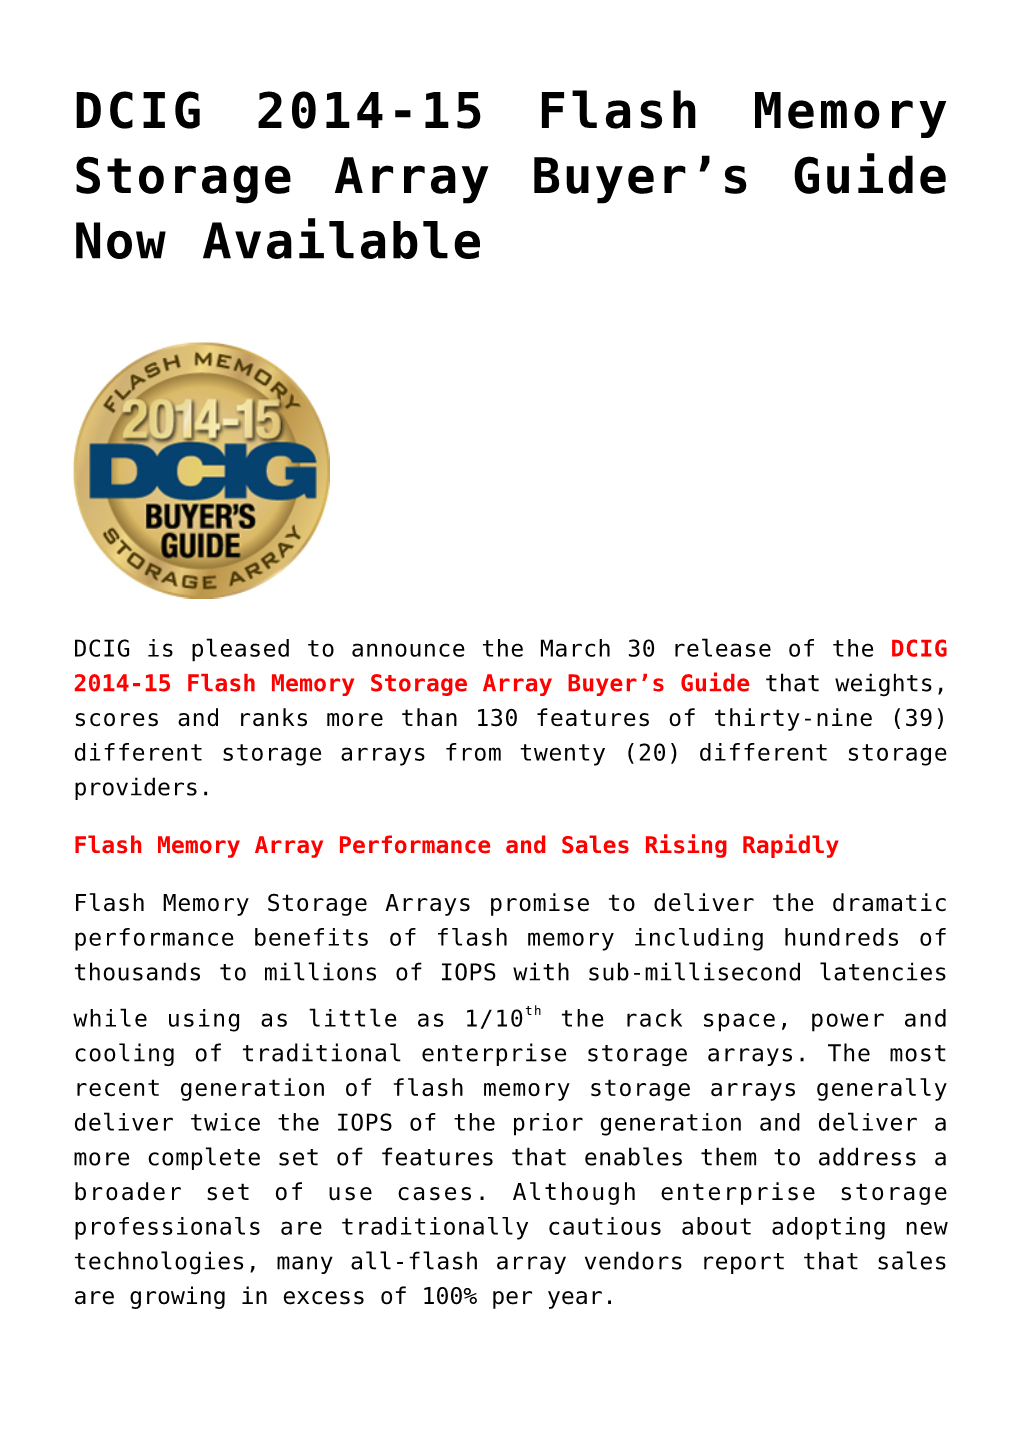 DCIG 2014-15 Flash Memory Storage Array Buyer's Guide Now